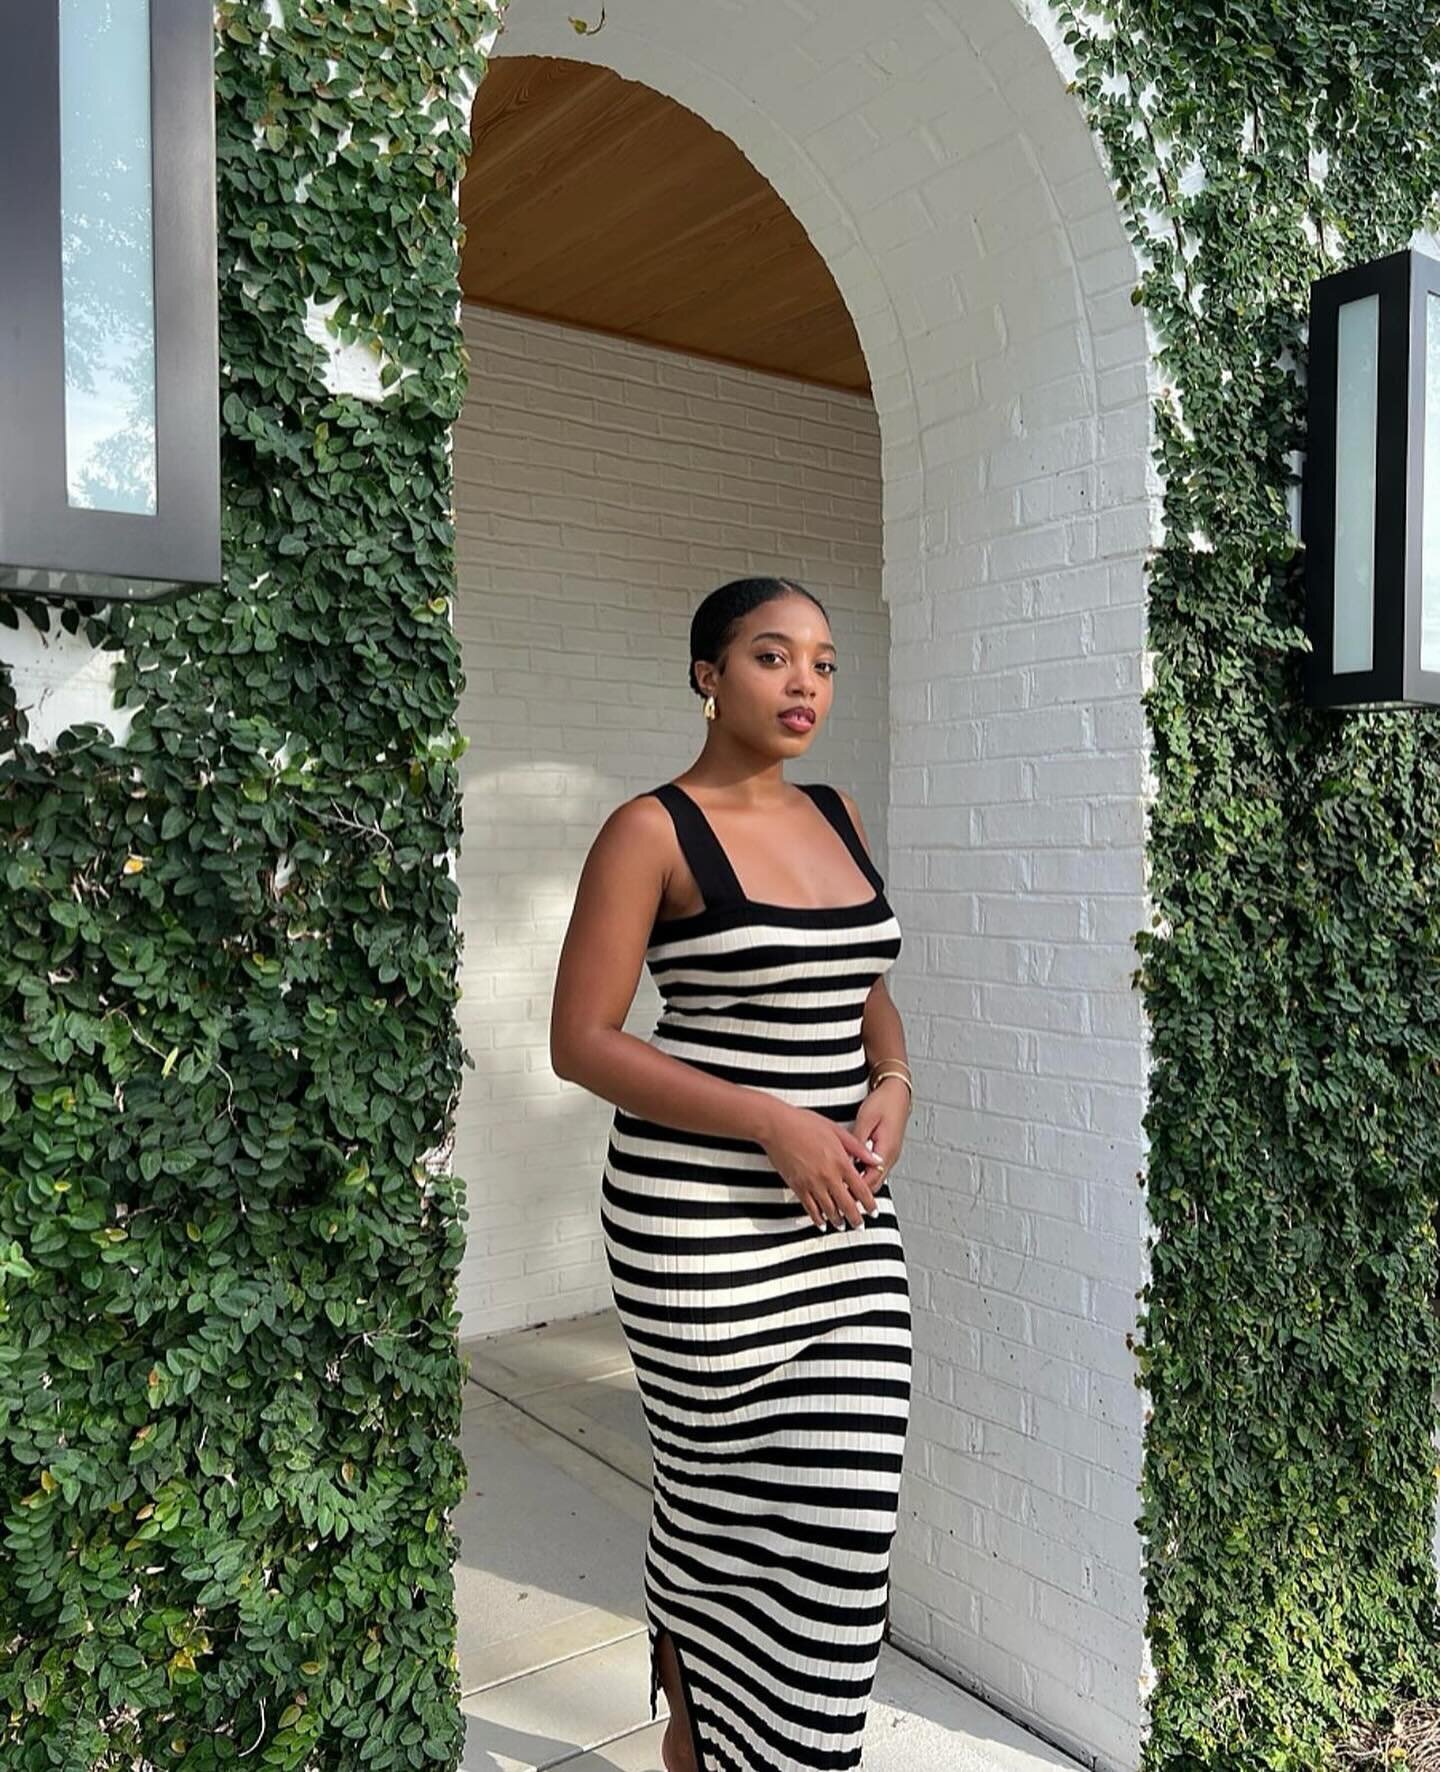 The stunning @posse Chloe dress worn by @diamondalicia_ 💎 sourced by us! TFS🖤🤍

#ootd #sourced #fashionagency #knits #fabrications #brandsupport #produce #knitproducts #knitproduction #fabricproduction #fashionstyle #fashioninfluencers